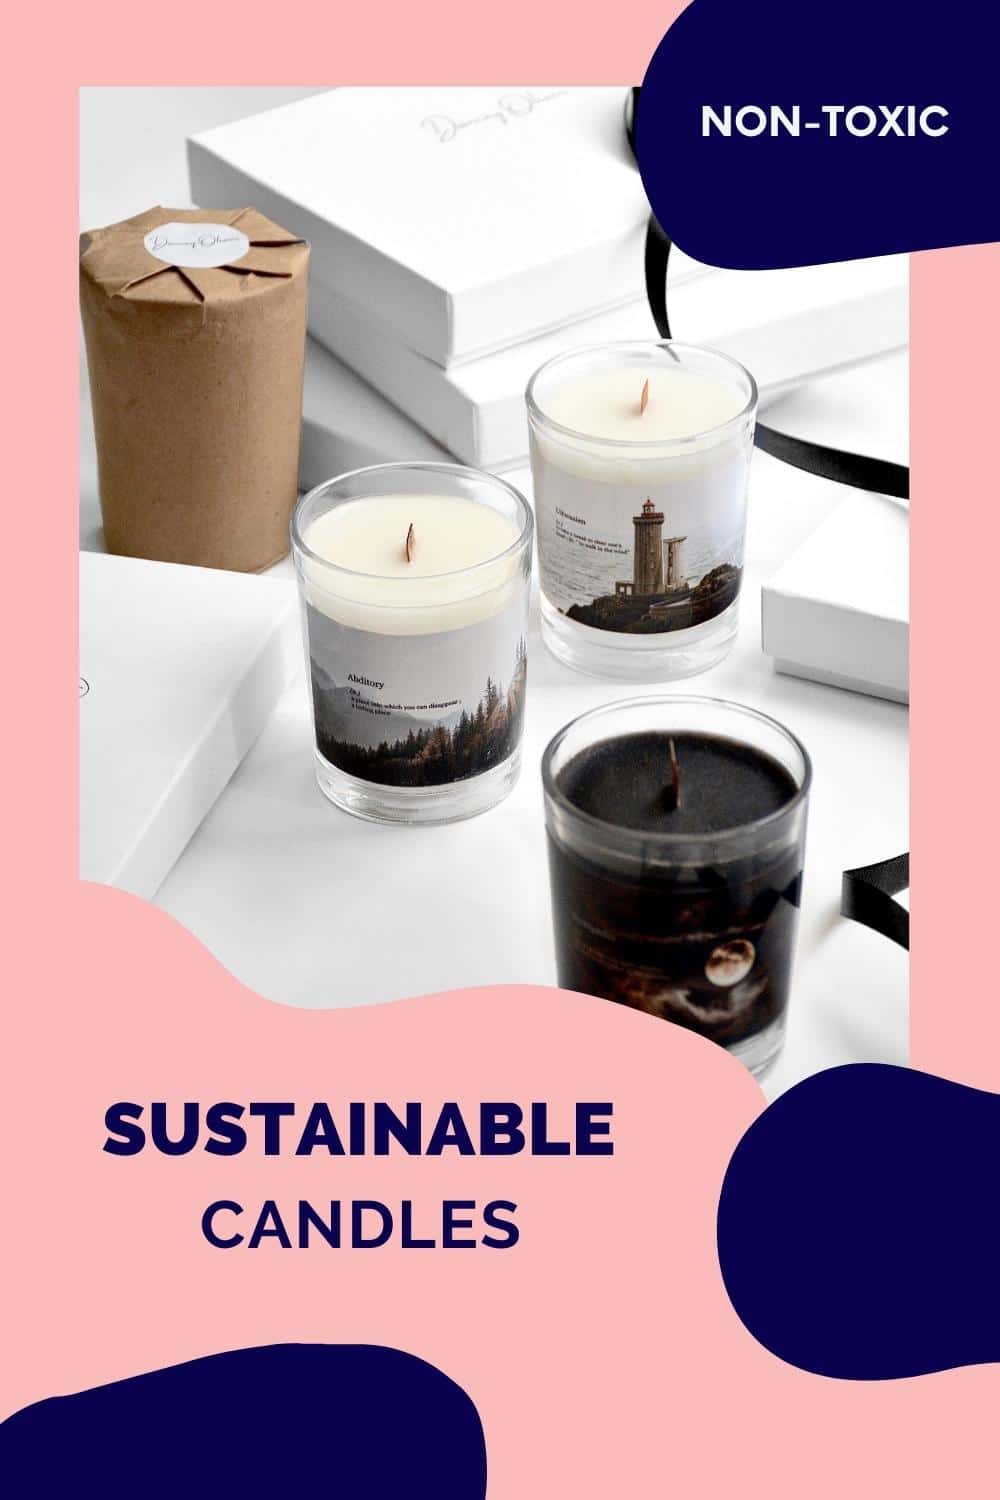 3 candles in jars and one wrapped in paper.